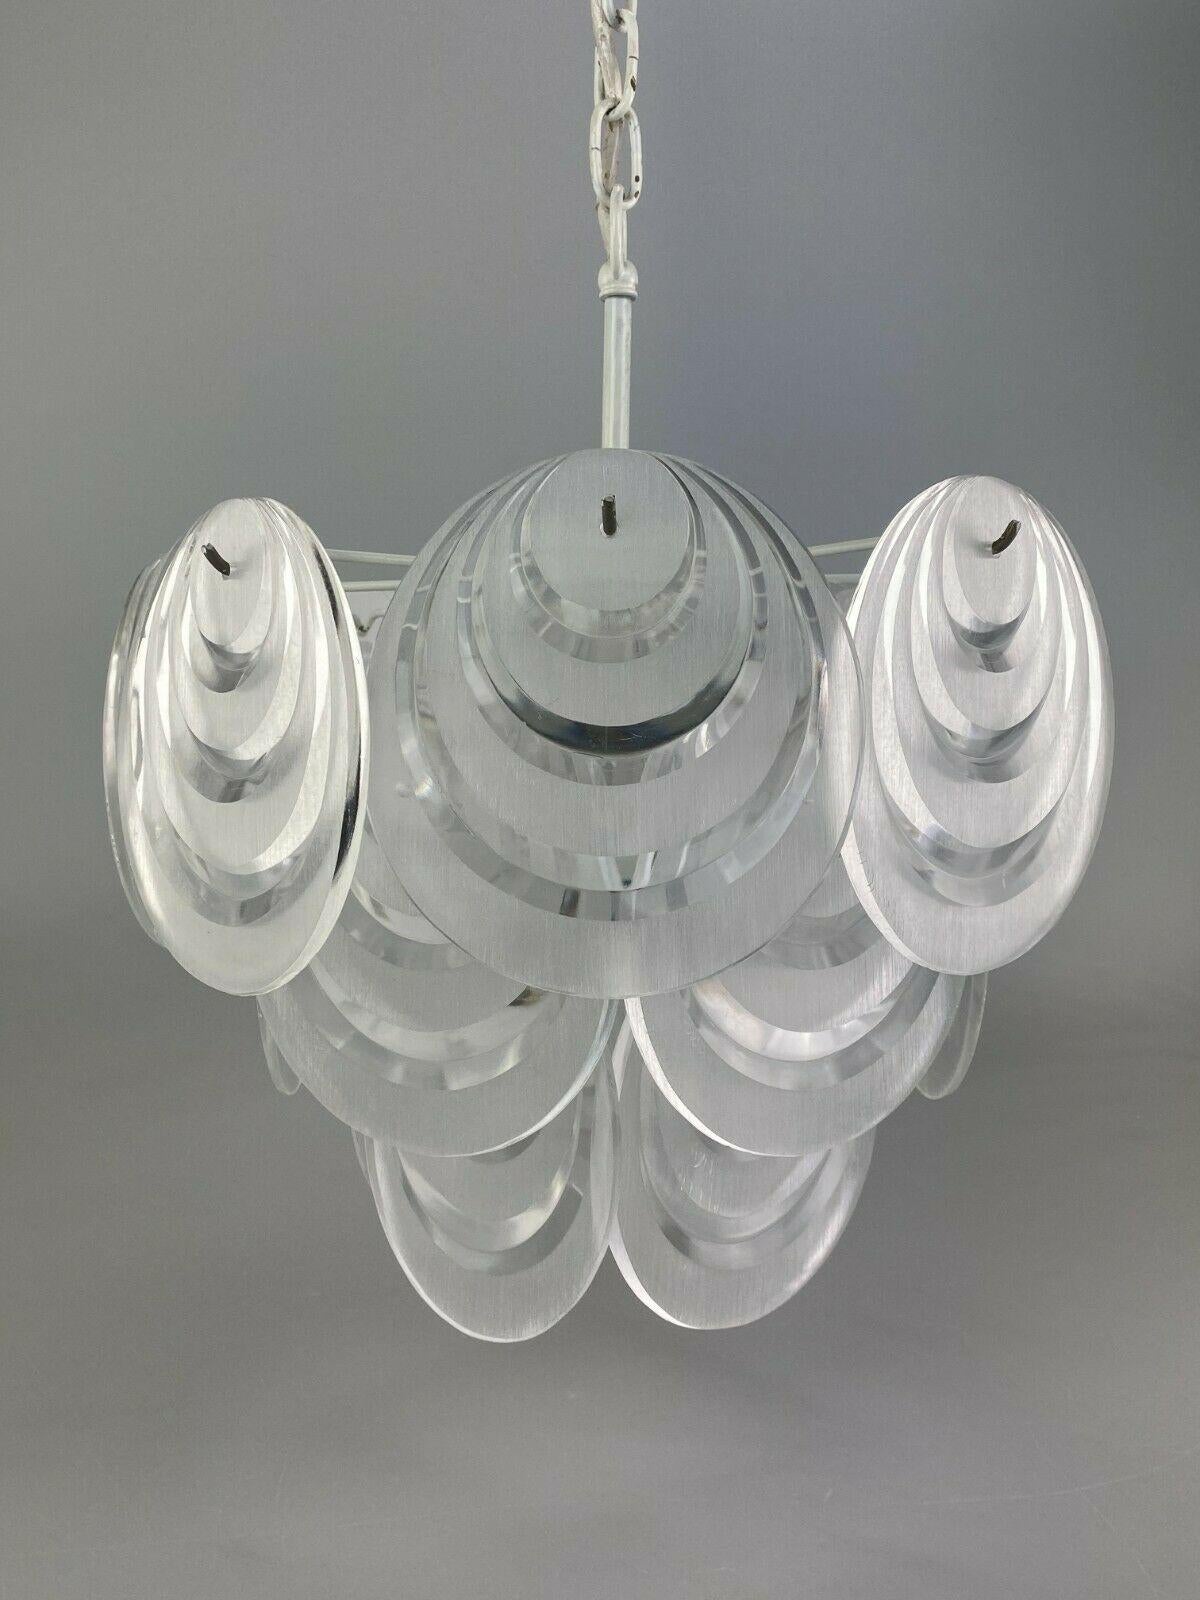 70s lamp light hanging lamp ceiling lamp Space Age design plastic 60s

Object: hanging lamp

Manufacturer:

Condition: good - vintage

Age: around 1960-1970

Dimensions:

Diameter = 33cm
Height = 27cm

Other notes:

The pictures